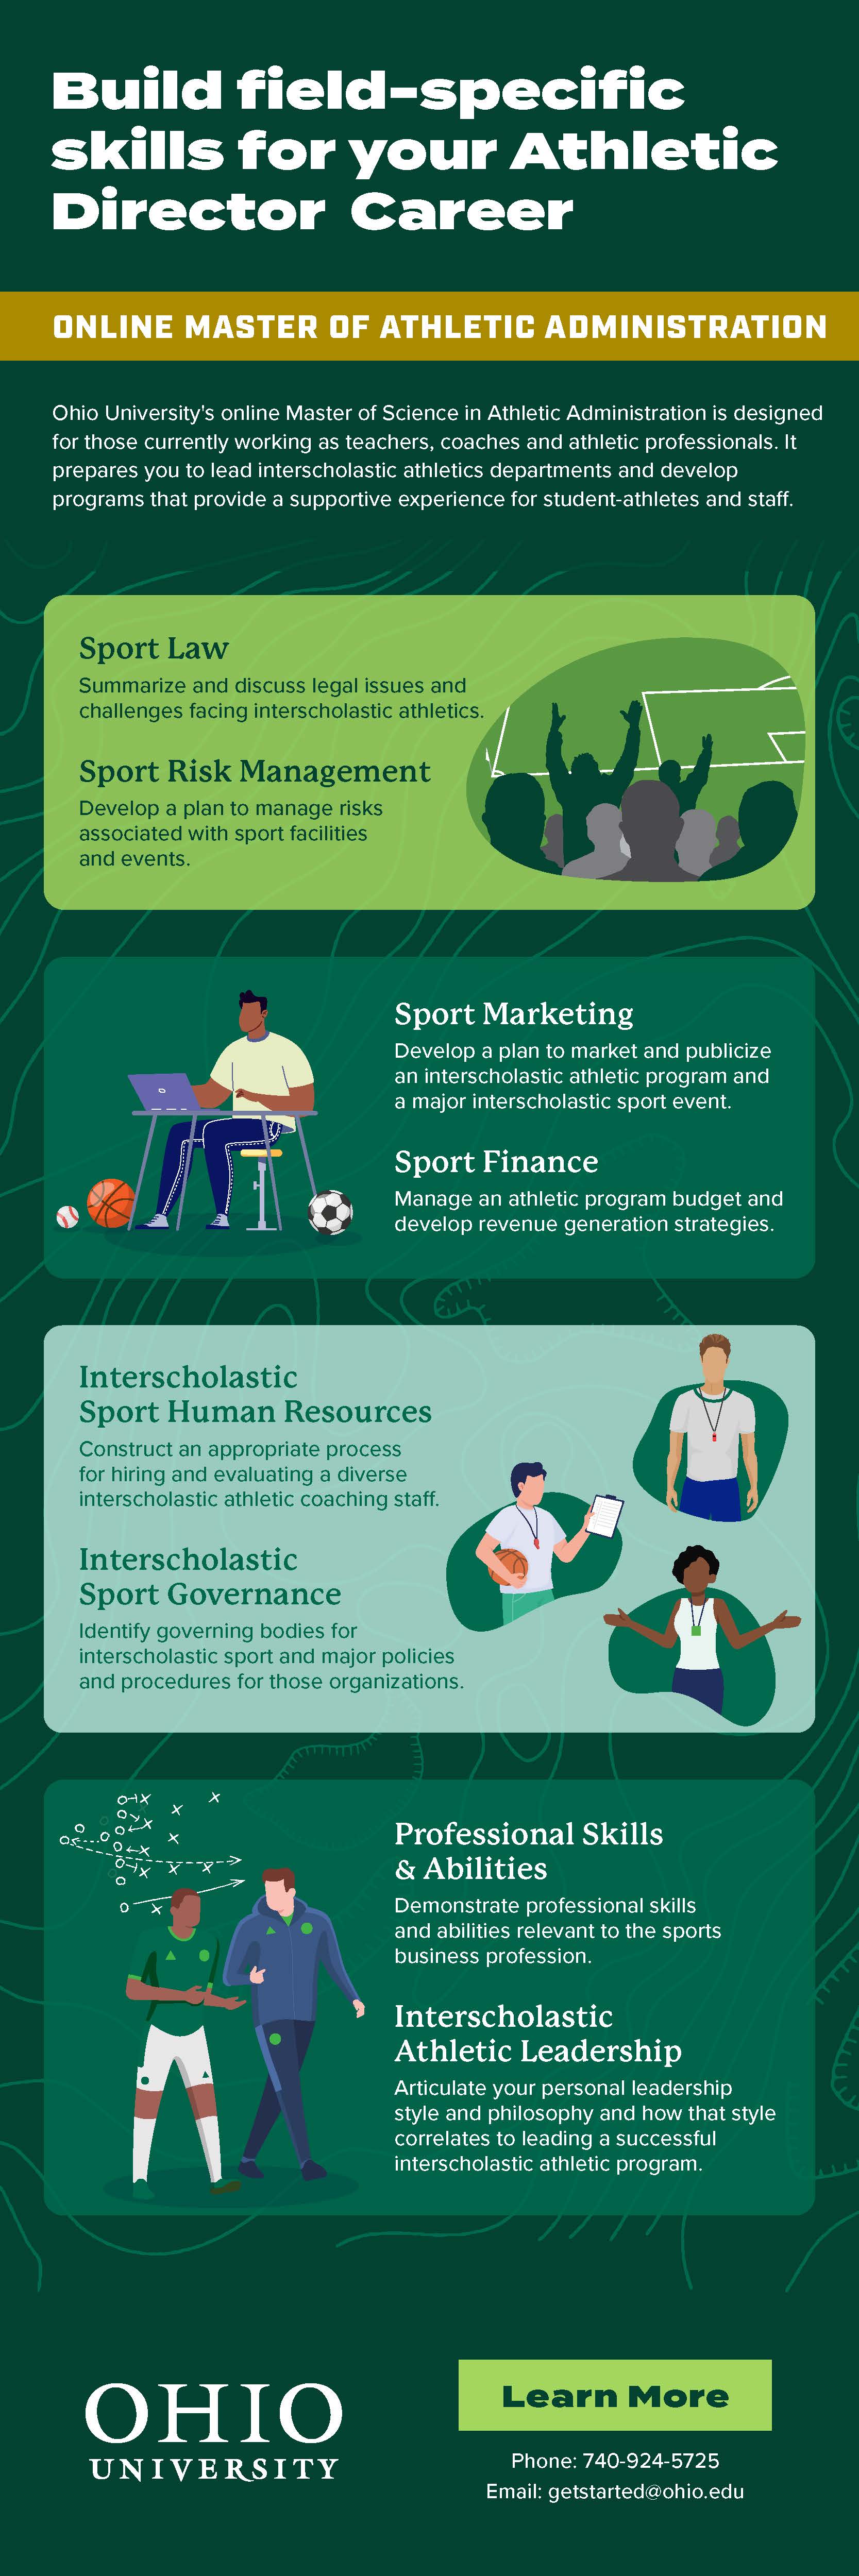 Vertical green infographic featuring graphics of athletes and displaying lists of skills for the online Master of Athletic Administration program